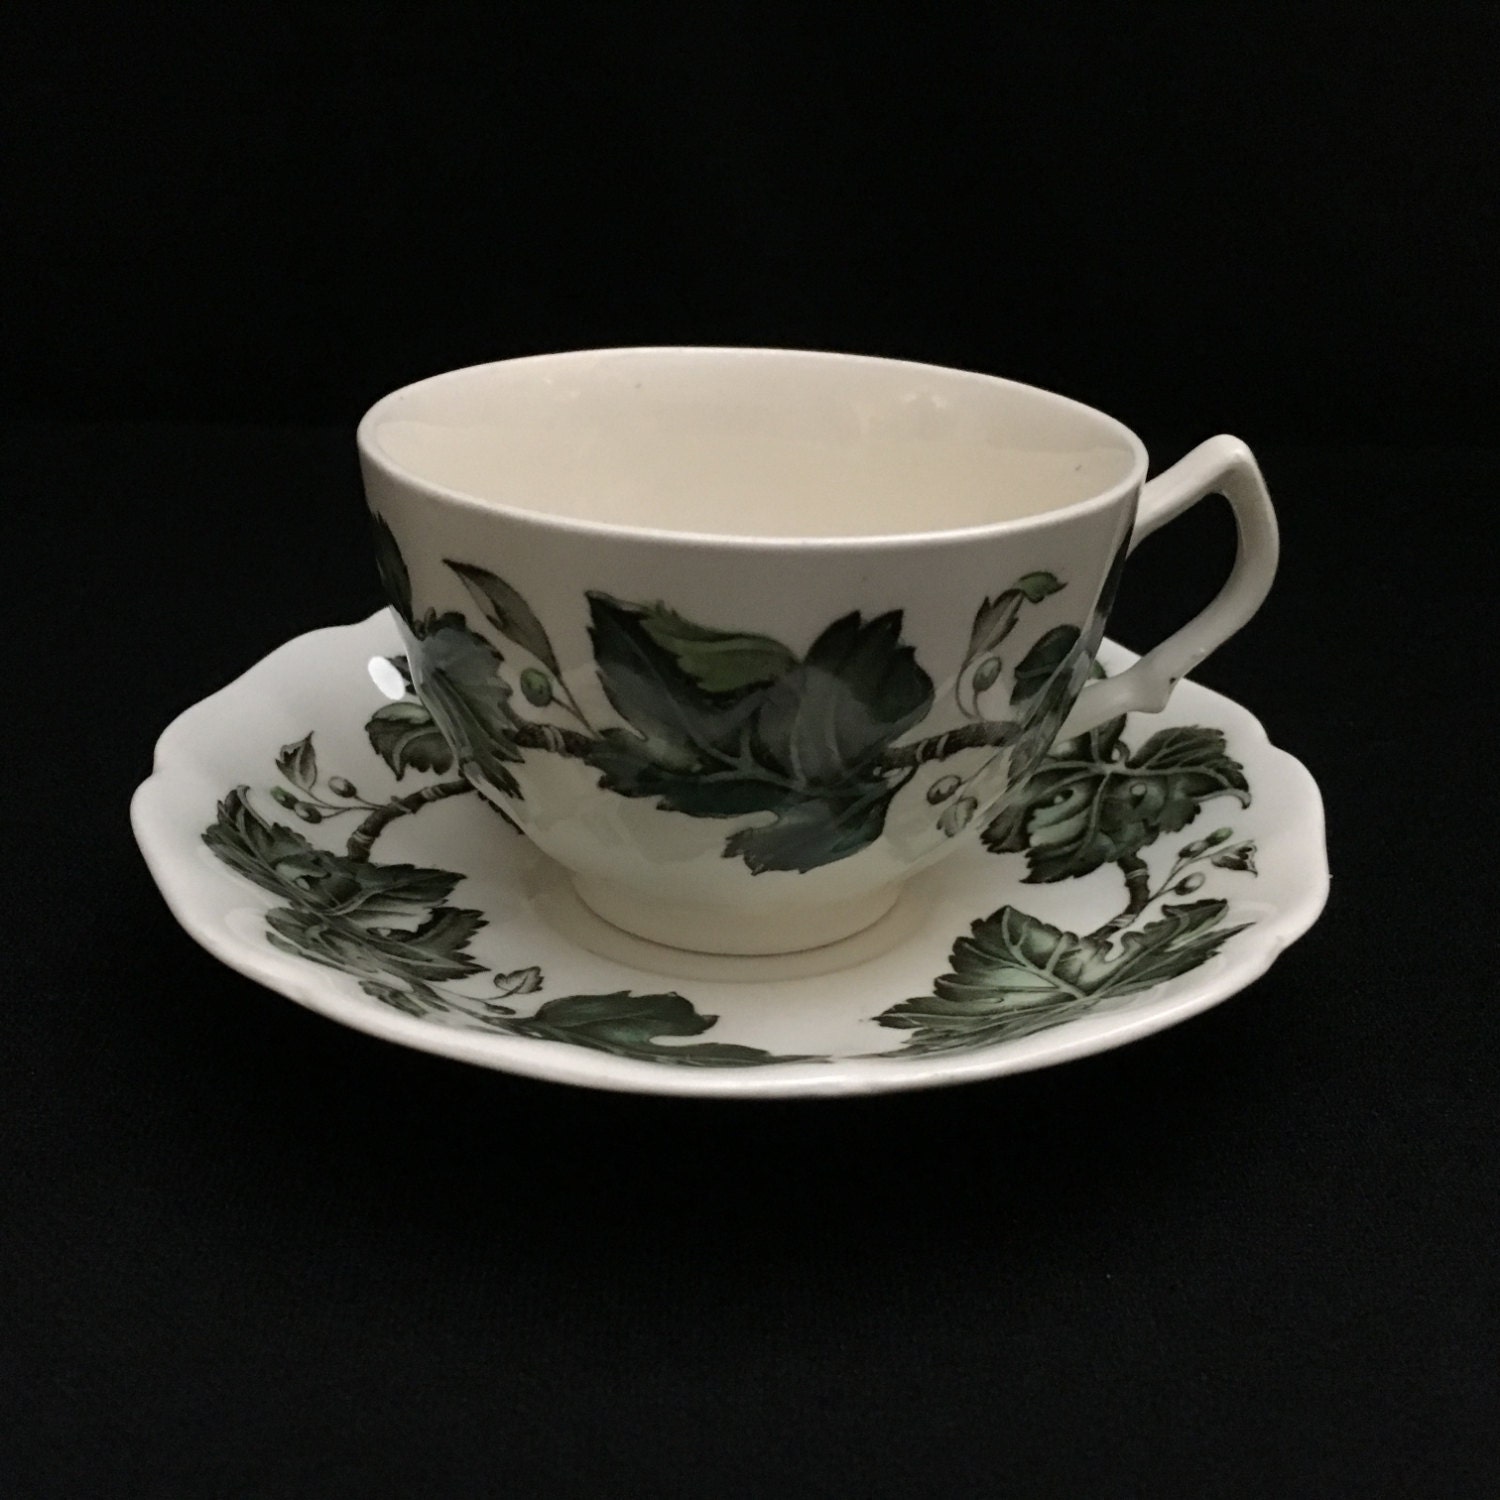 Vintage Johnson Bros Ivy Leaf Tea Cup and Saucer Made in